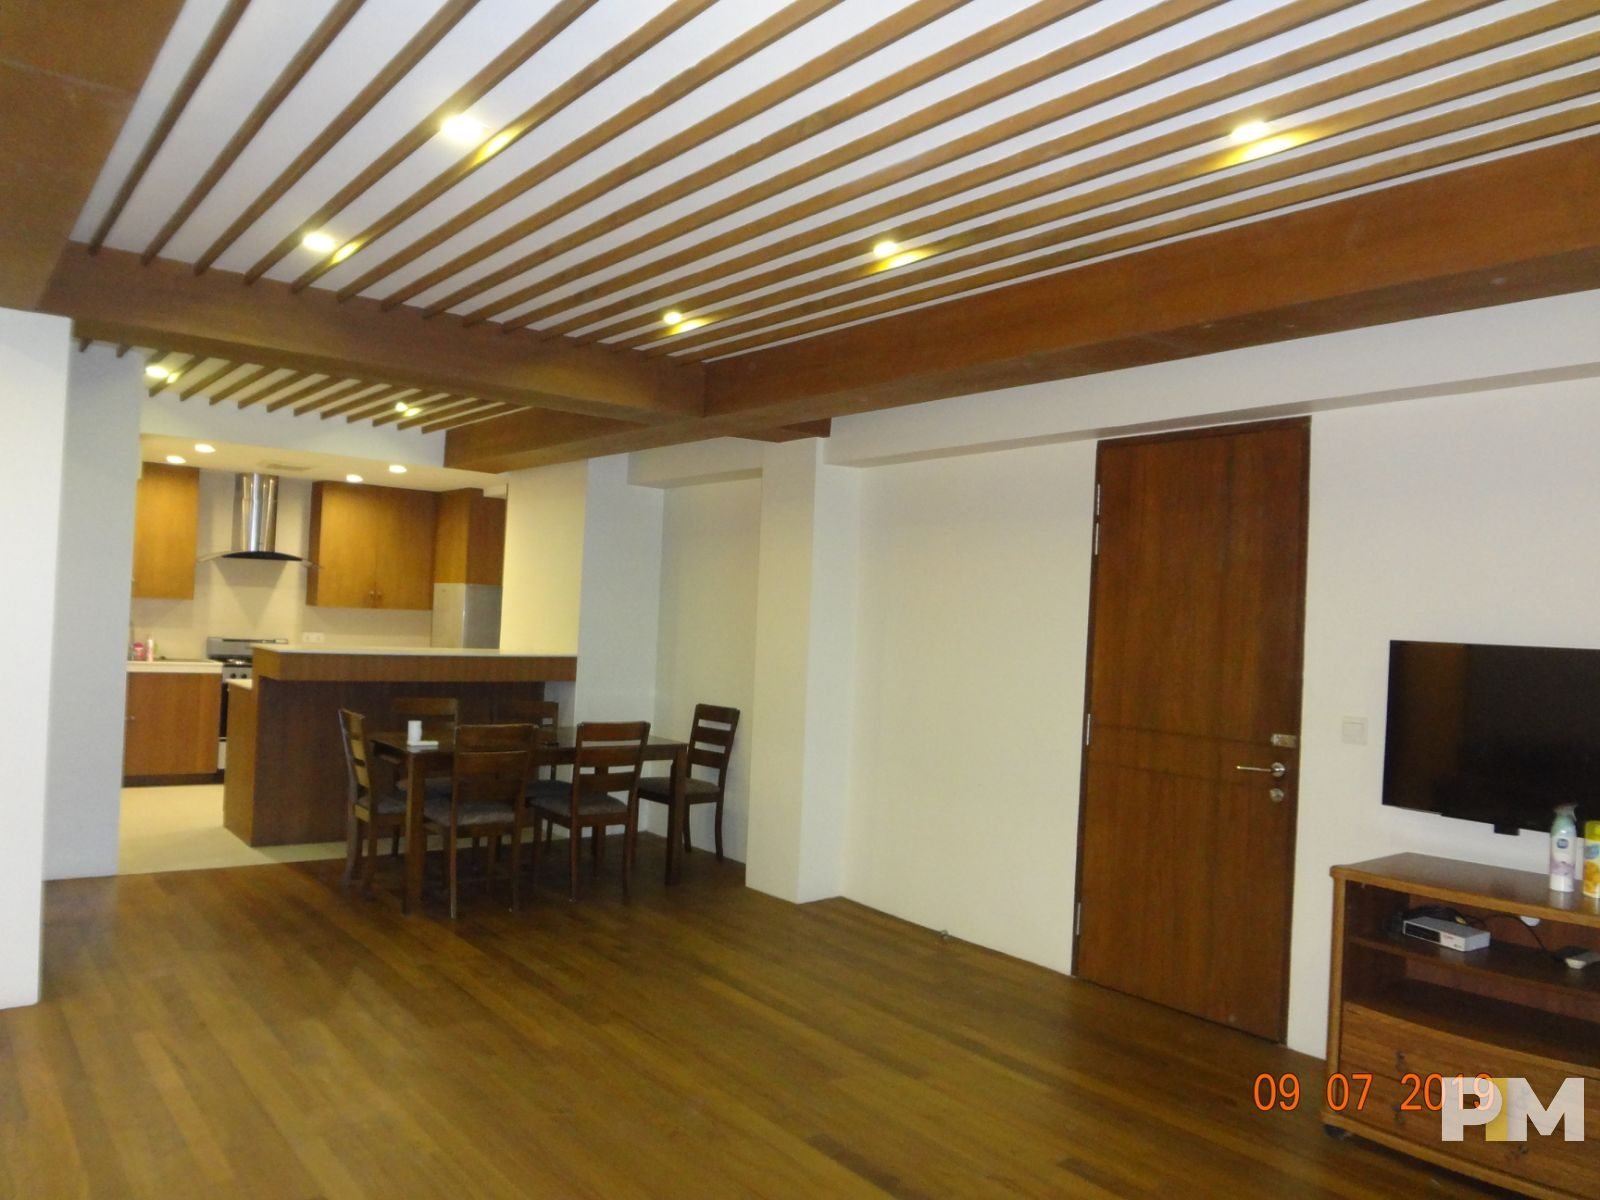 living room with open kitchen - Yangon Property